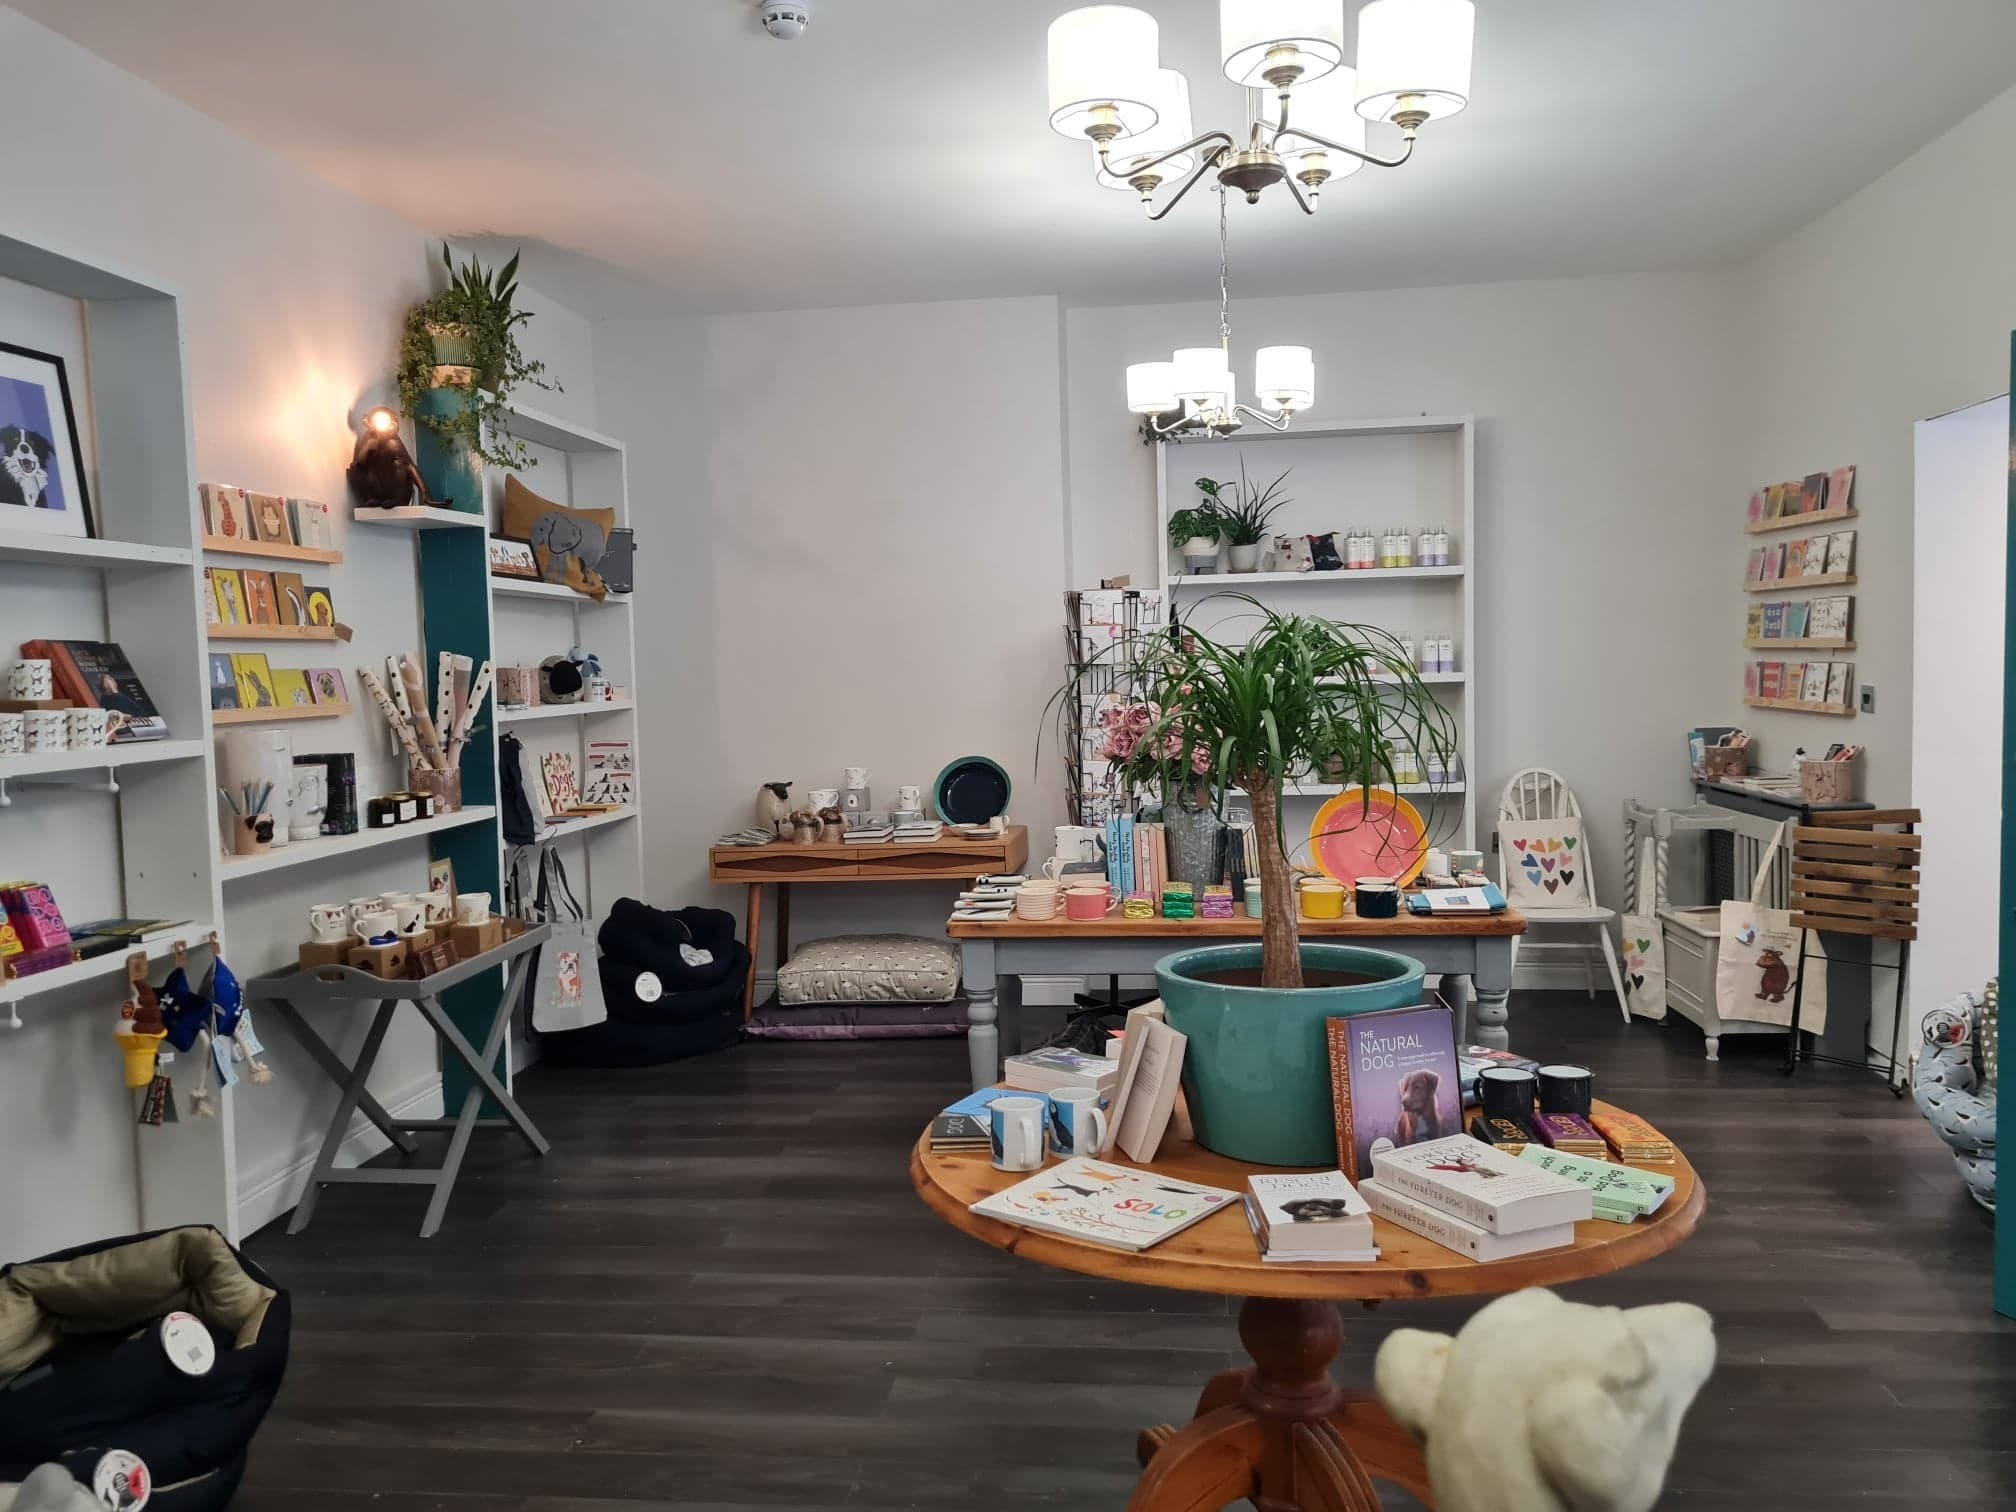 The owner of Dudley and George’s, a shop specialising in human homeware and dog products, has applied to Conwy’s planning department for permission to add a café to the store. ..The shop at 127 Mostyn Street is already an established